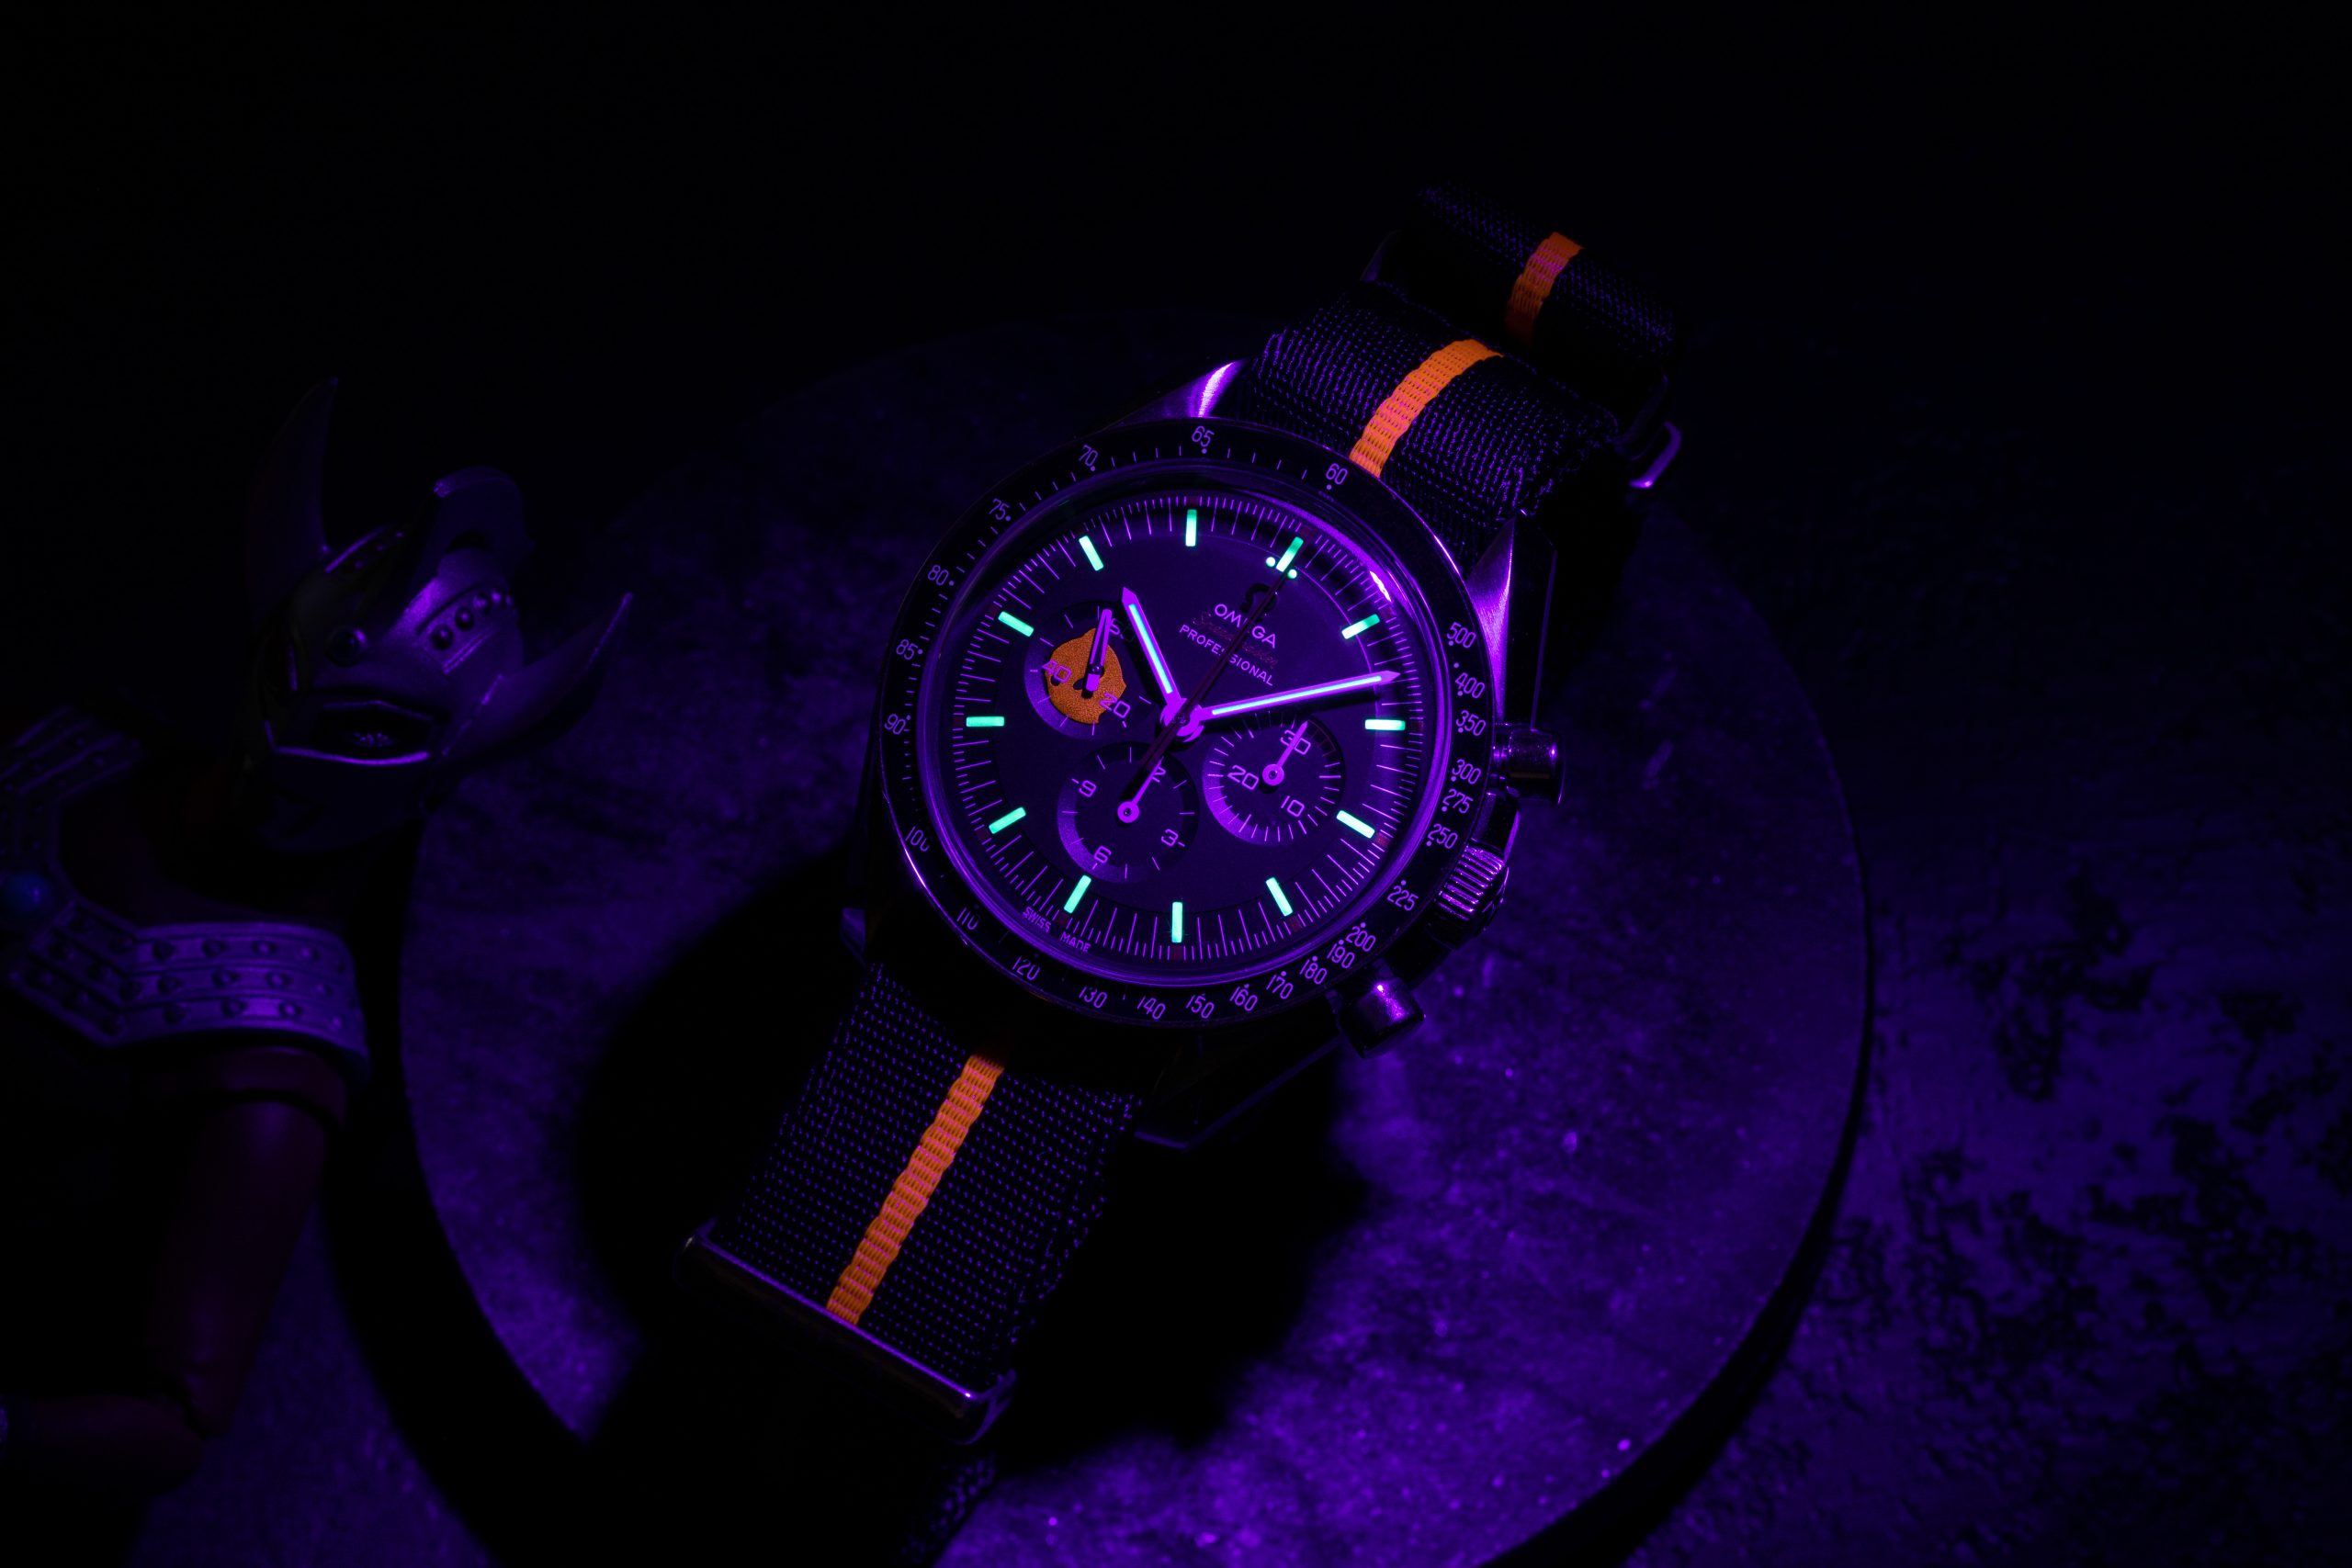 The hidden luminous Ultraman silhouette painted inside the continuous seconds marker can be seen only when a UV light used on the 2018 Speedmaster Limited Edition 42mm "Ultraman" , while in the dark